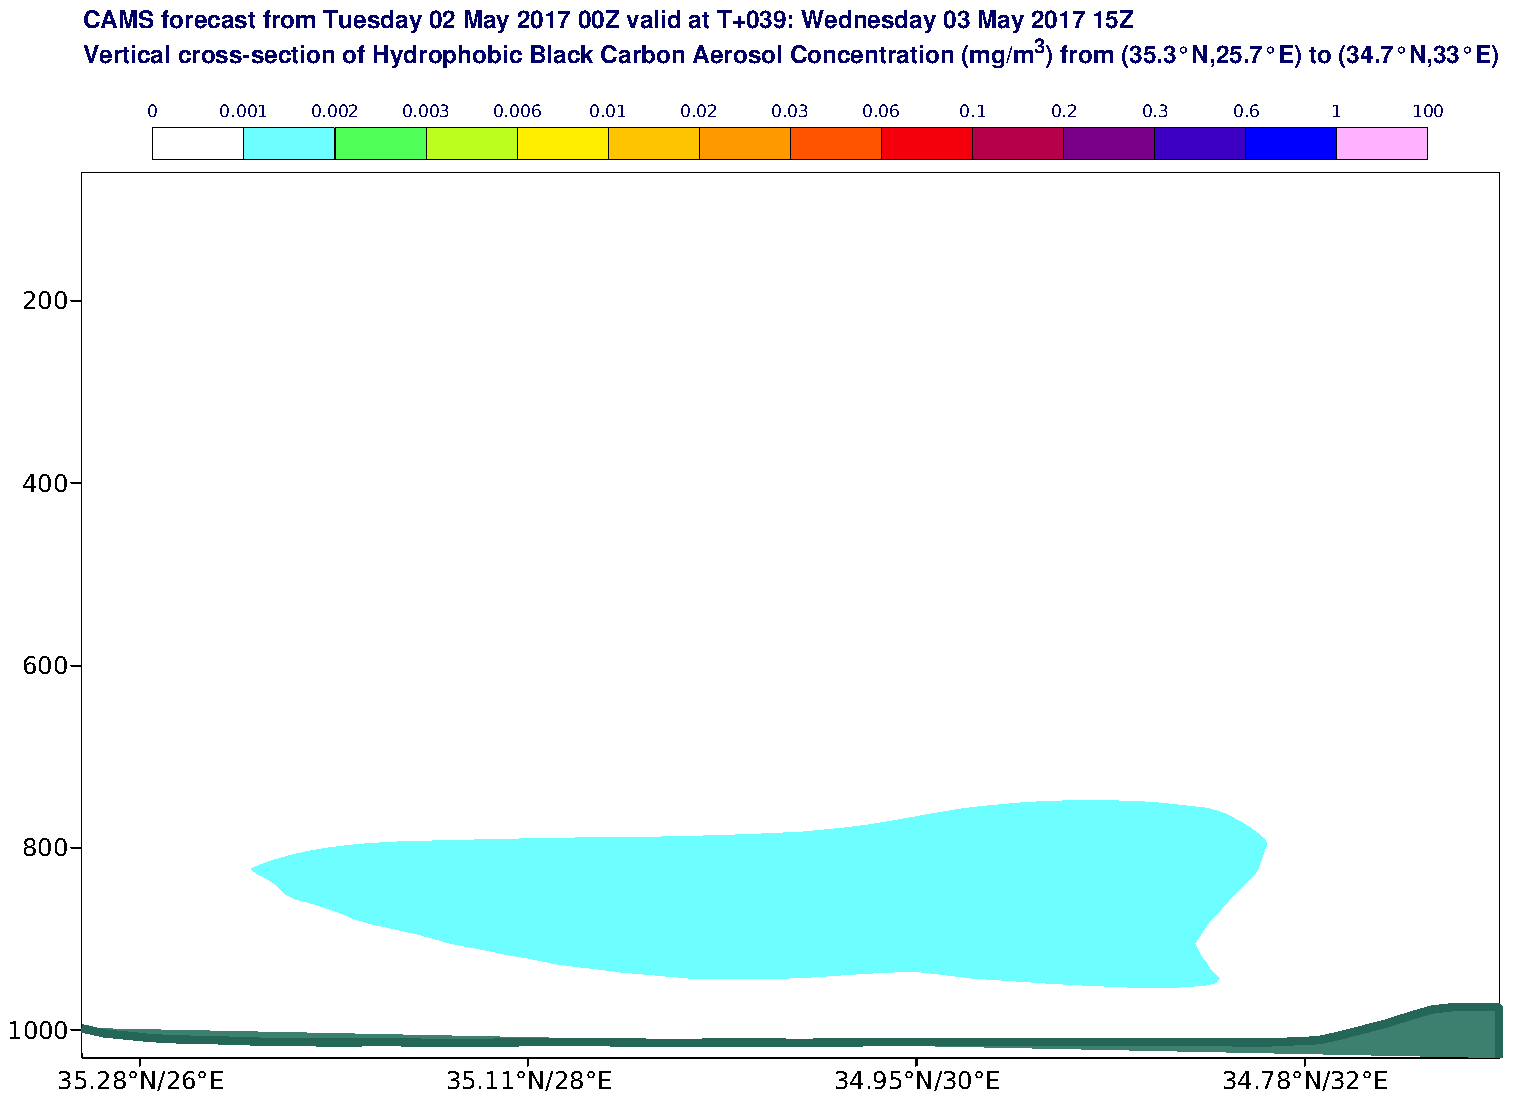 Vertical cross-section of Hydrophobic Black Carbon Aerosol Concentration (mg/m3) valid at T39 - 2017-05-03 15:00